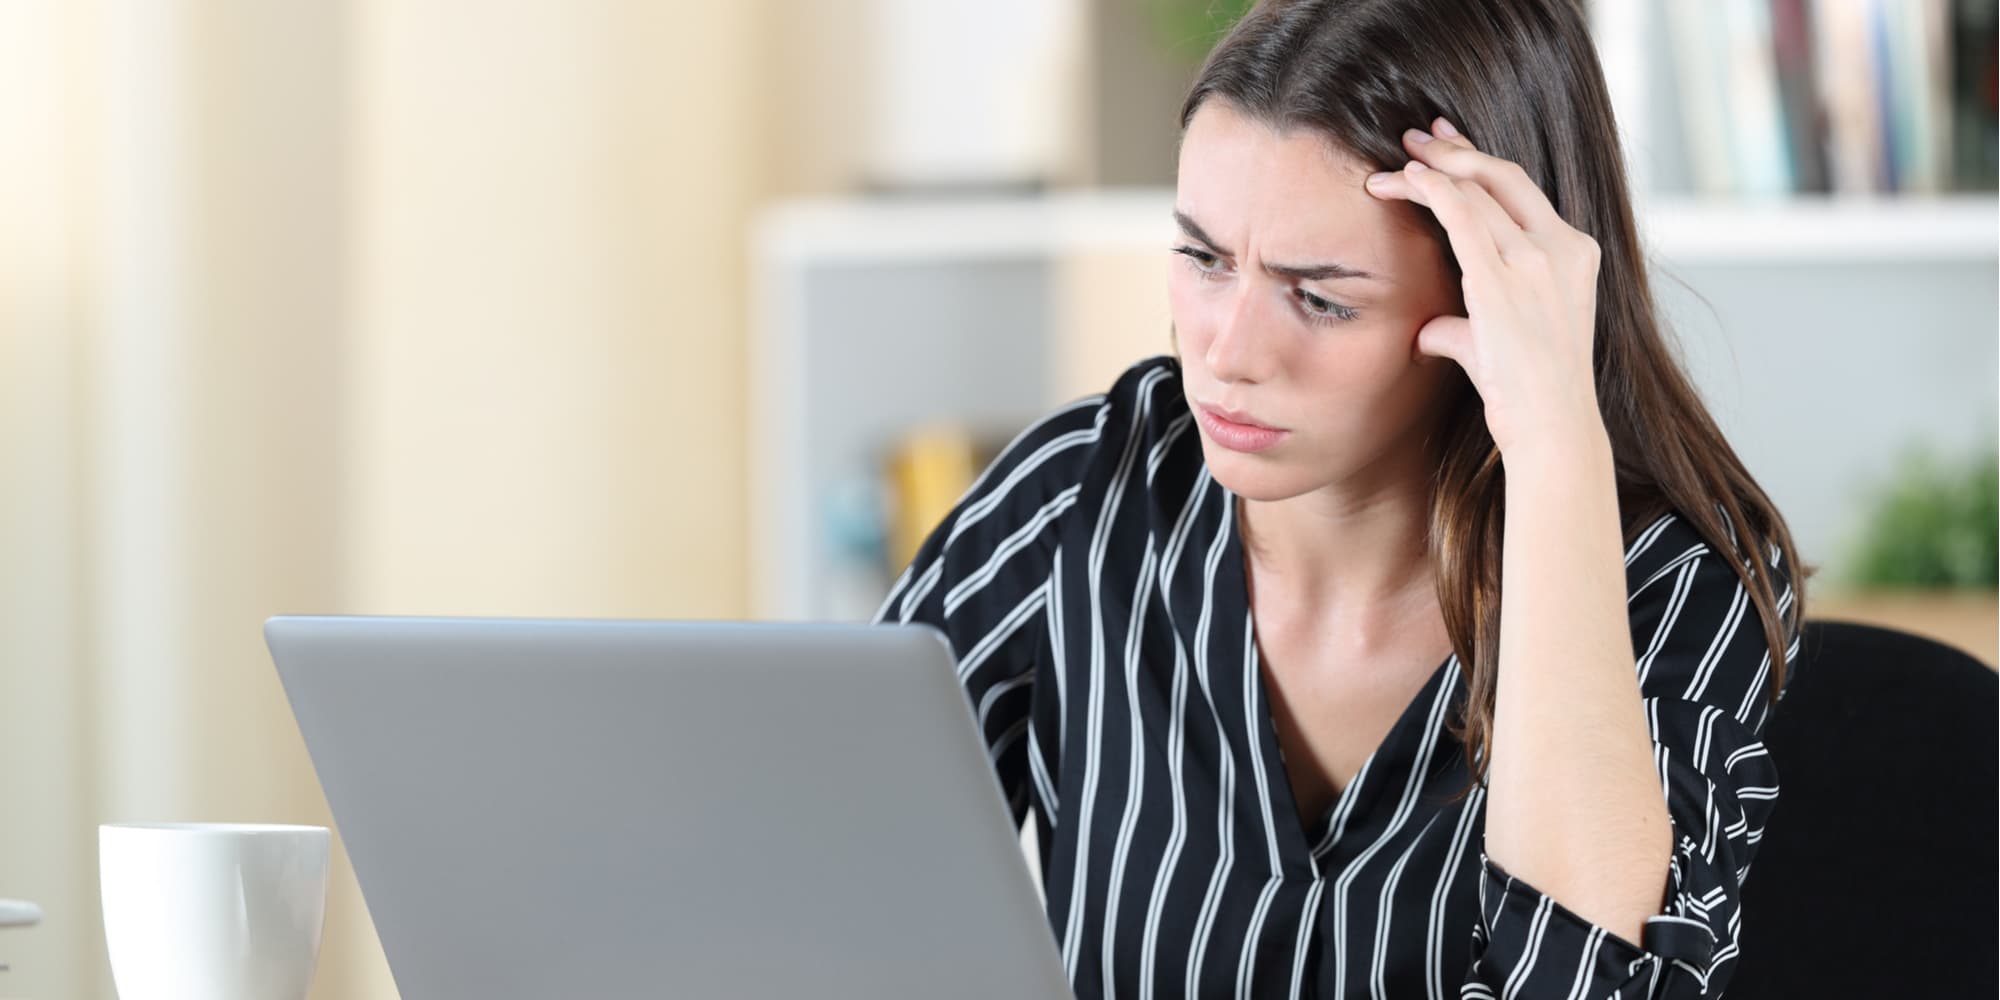 Young woman stares on computer screen with frustration and hand on forehead